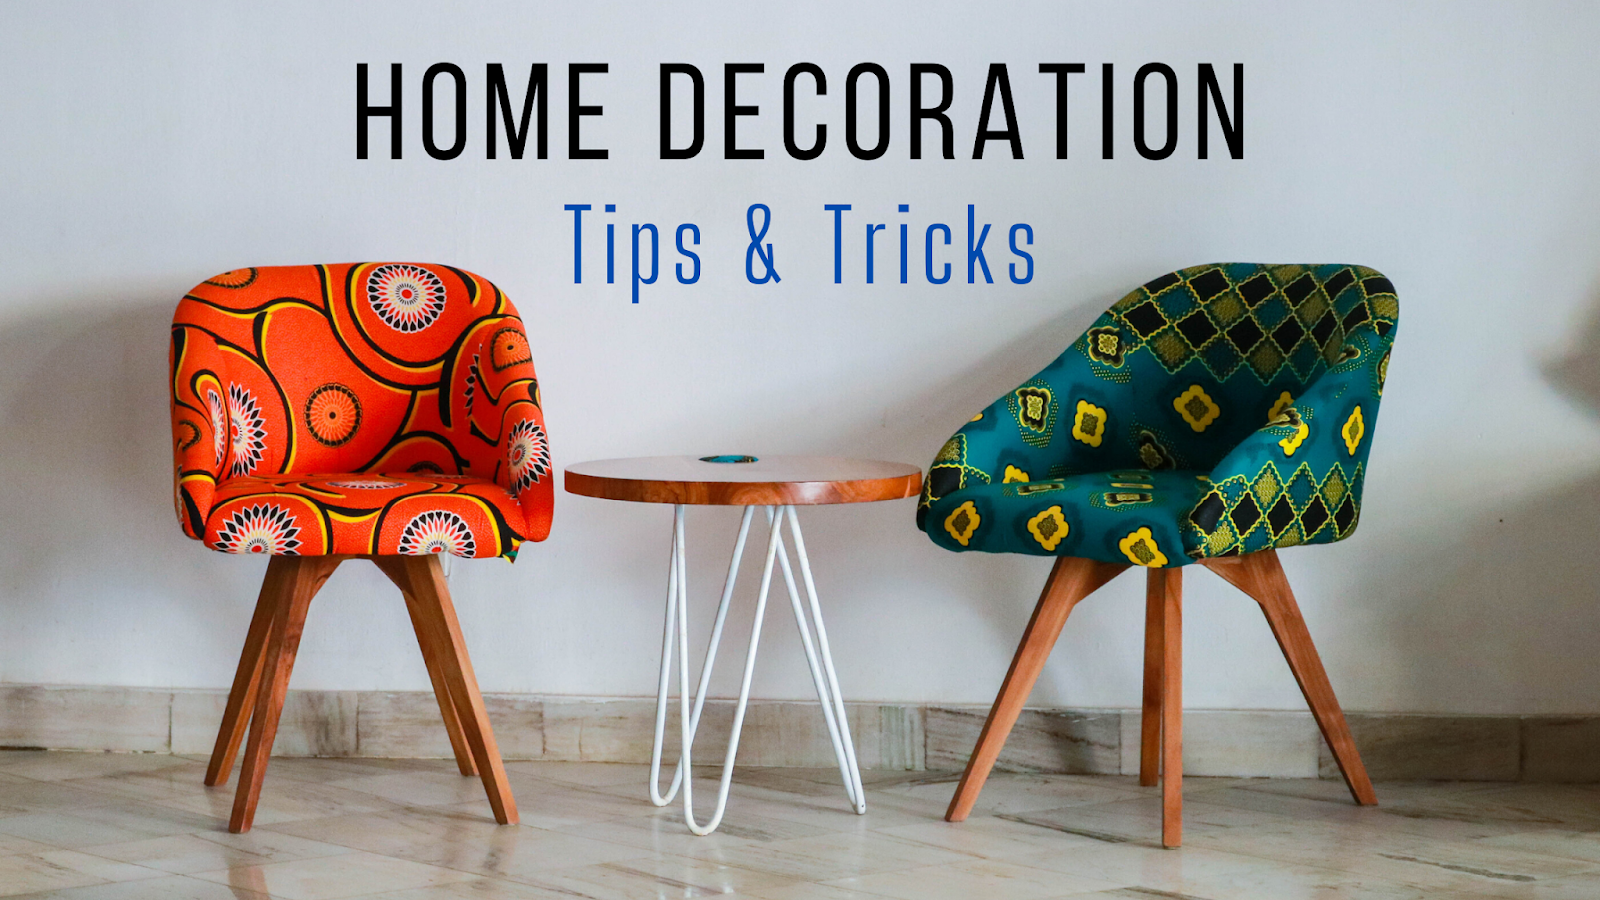 Home decoration tips, decoration tips and tricks